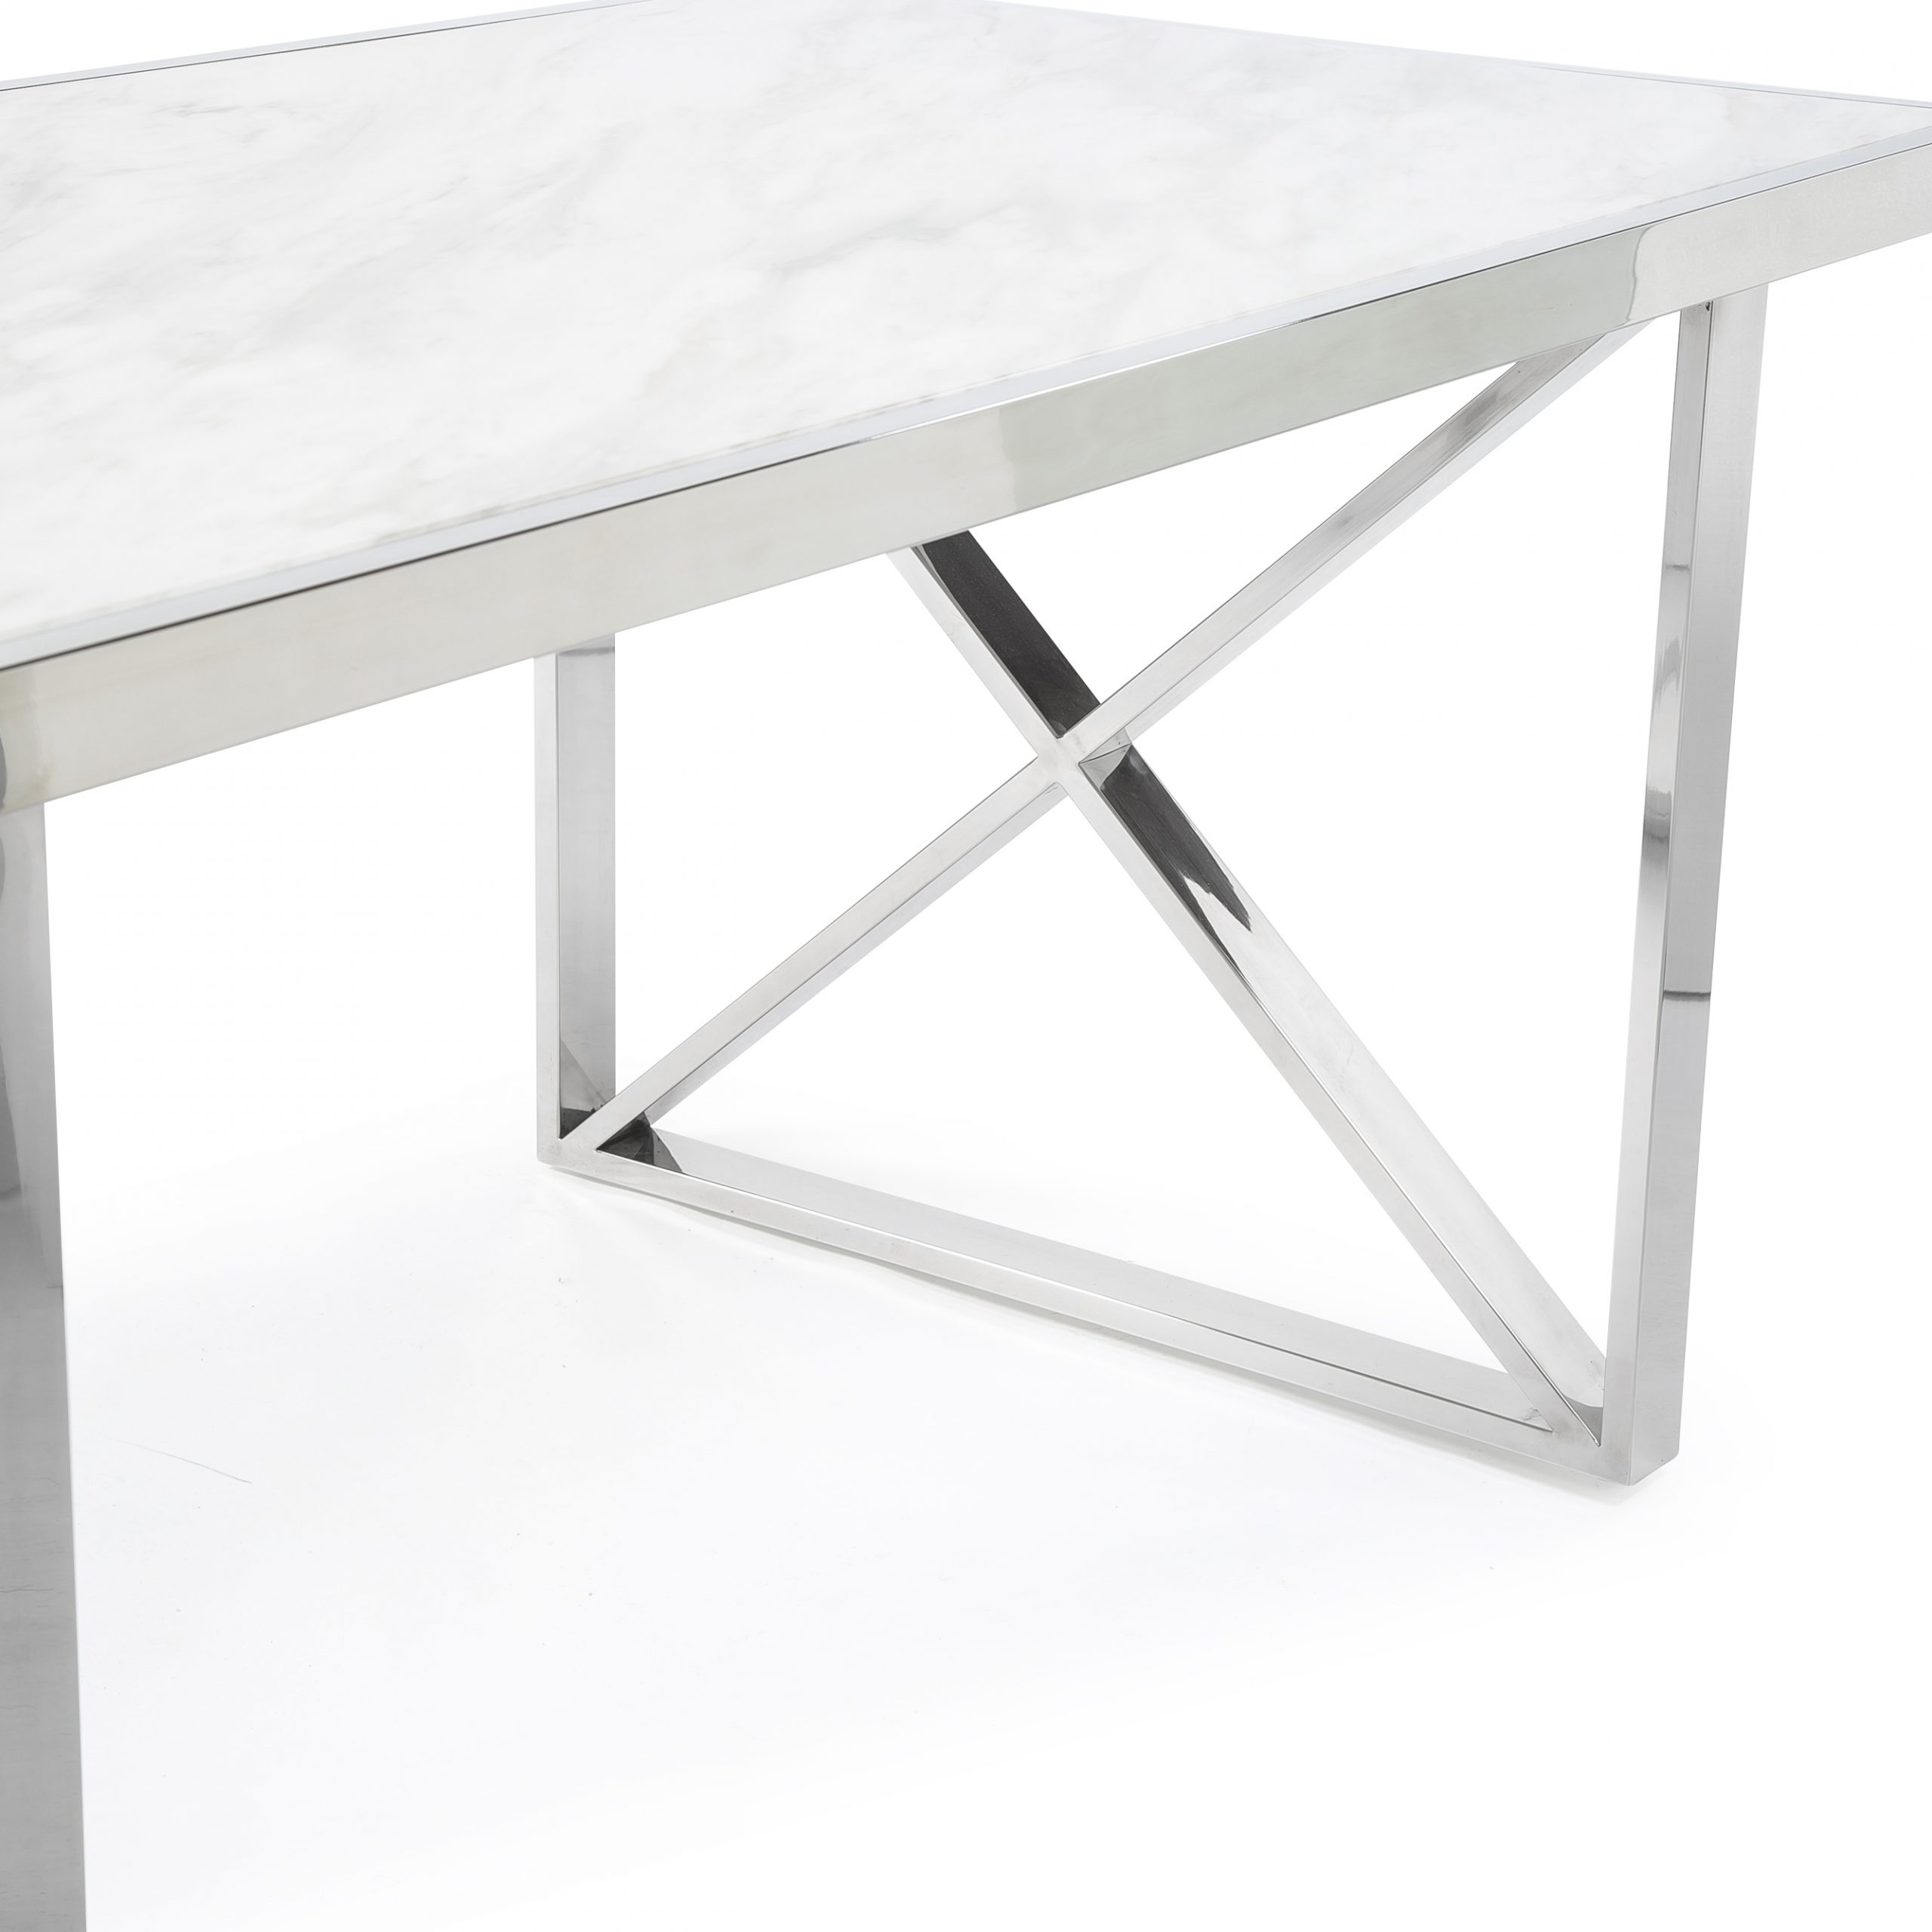 1.8M Tuscany White Marble Dining Table with a Polished Steel Cross Structure Base